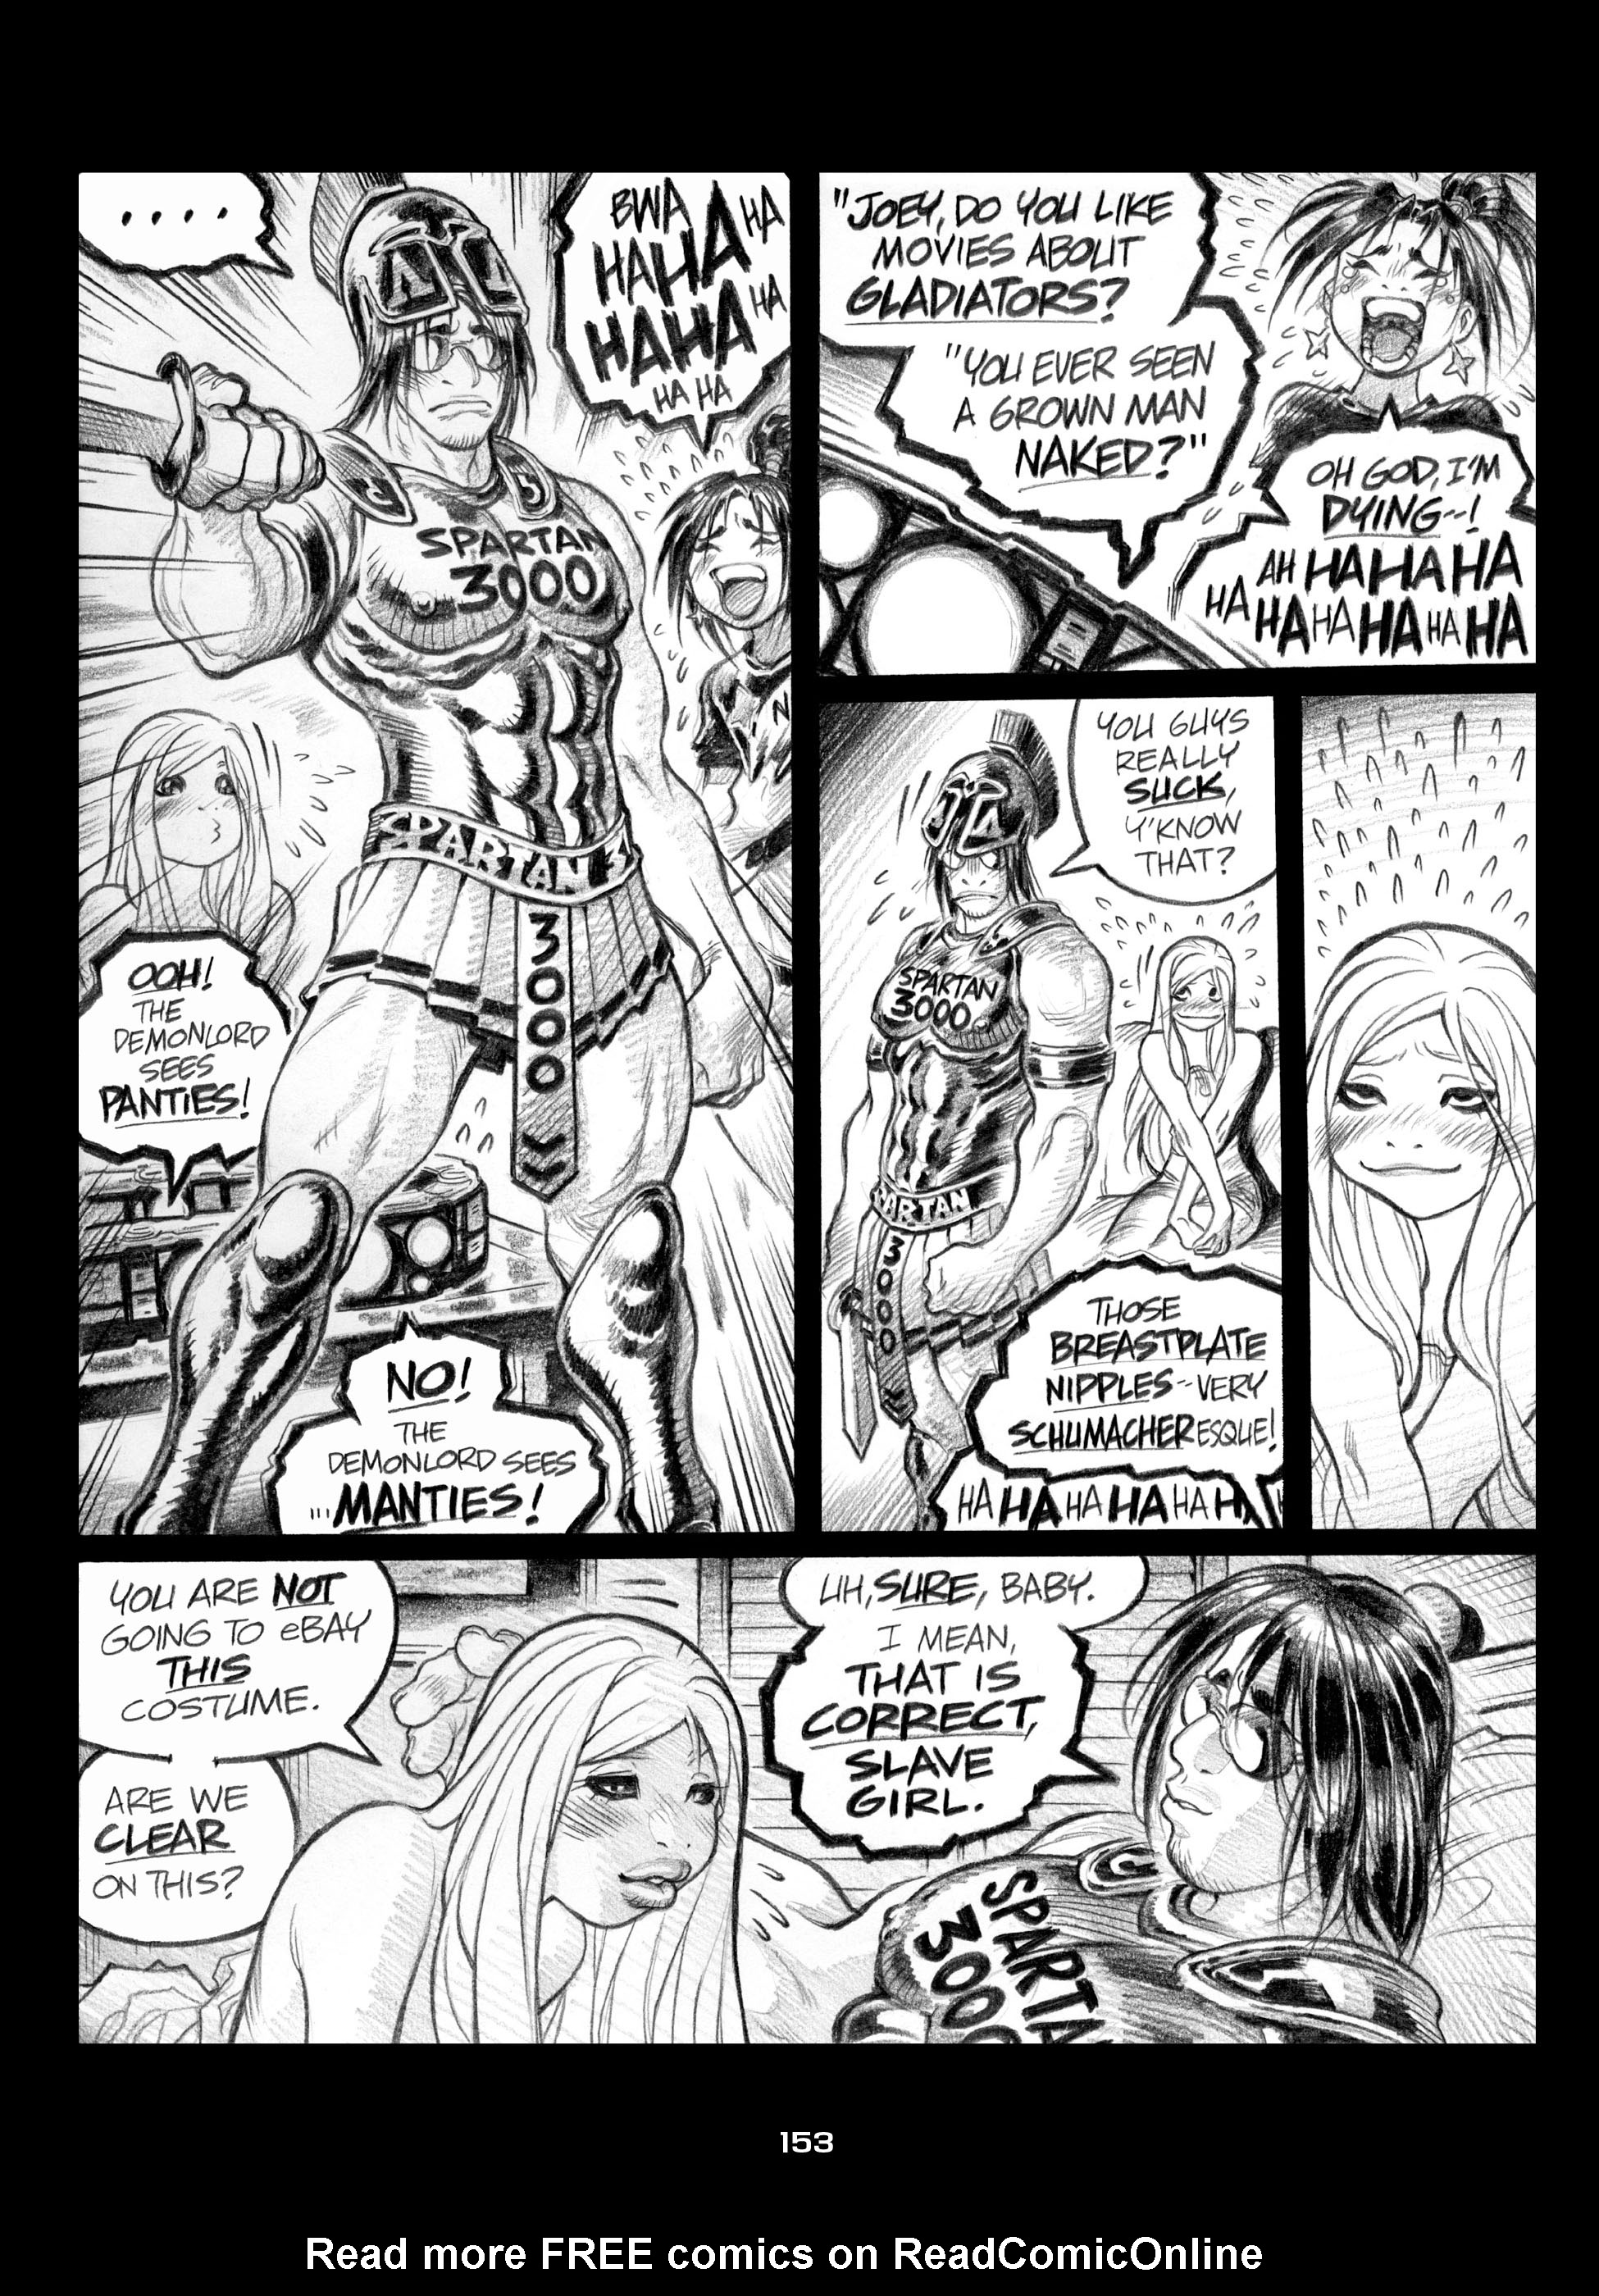 Read online Empowered comic -  Issue #1 - 153